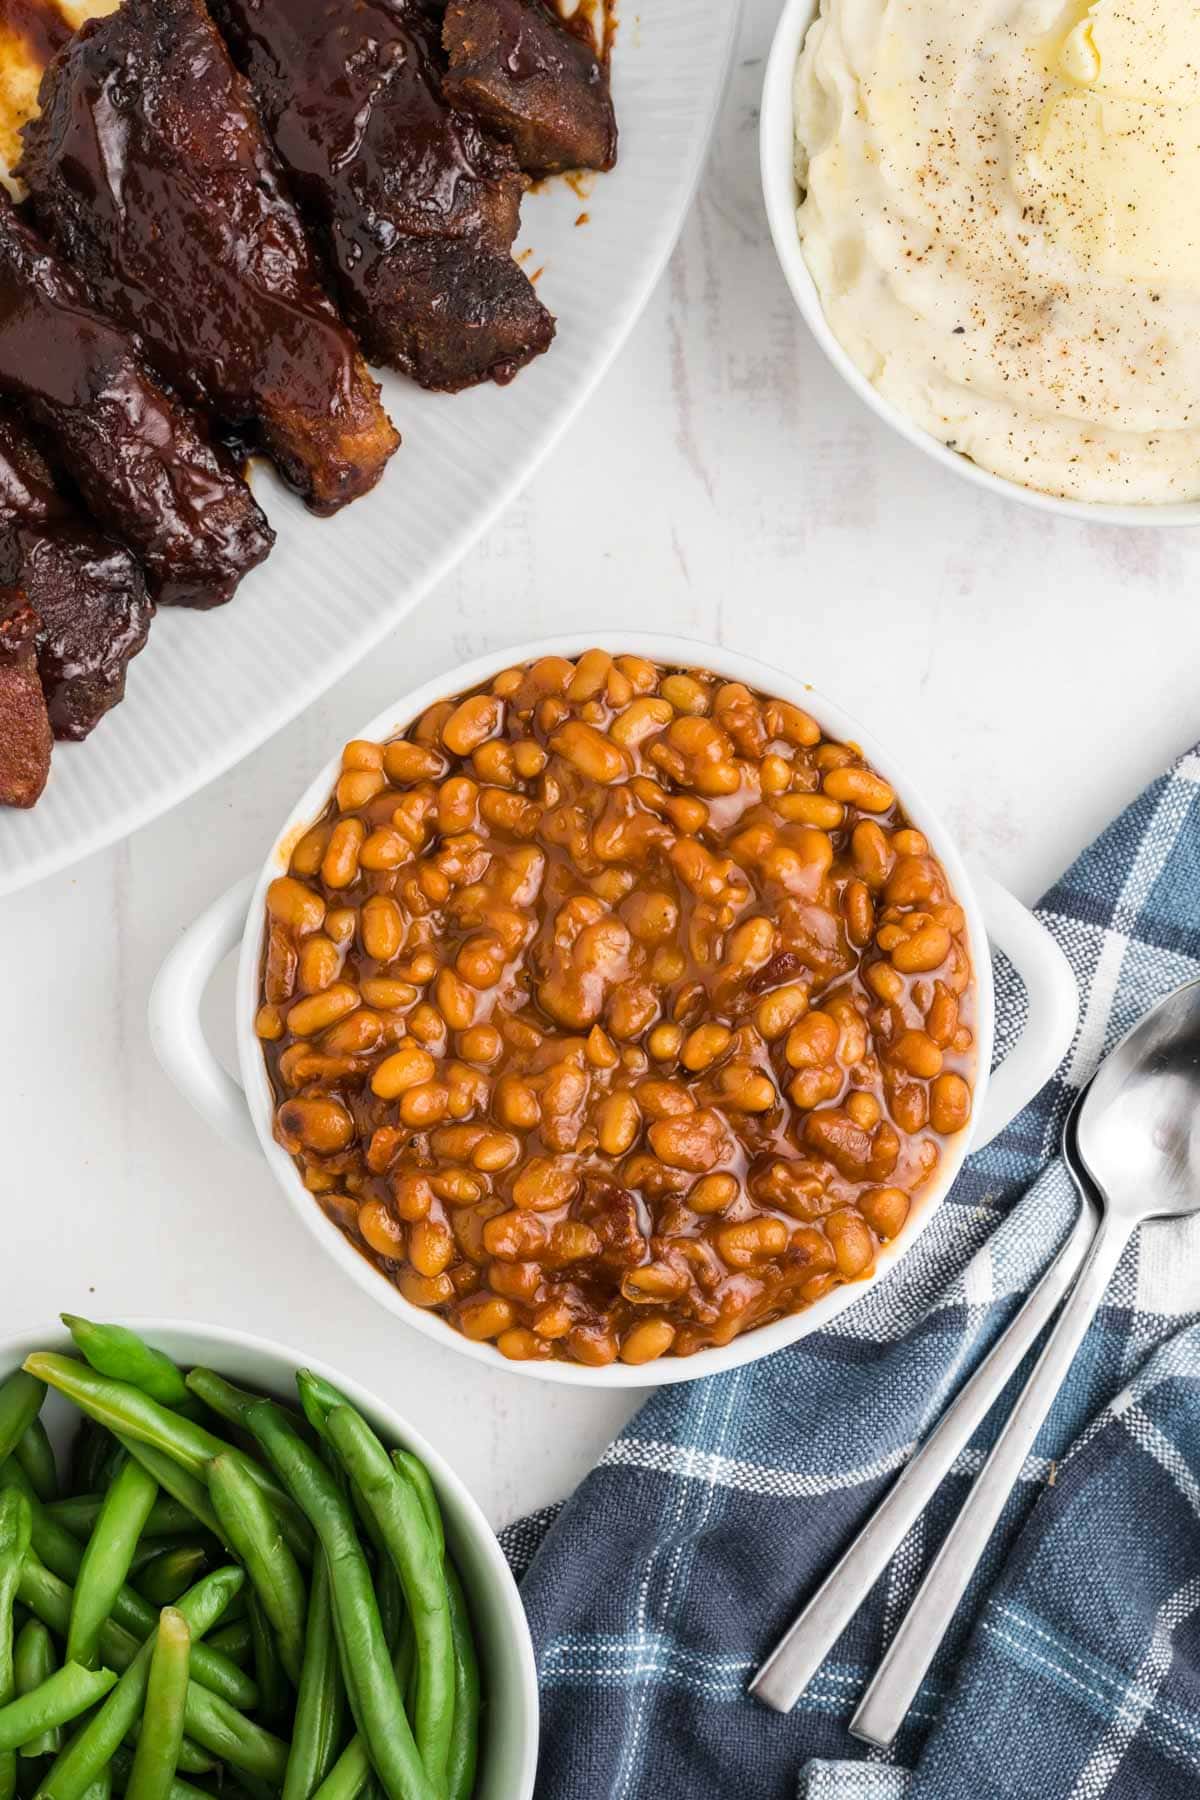 Baked beans in a small white serving bowl.